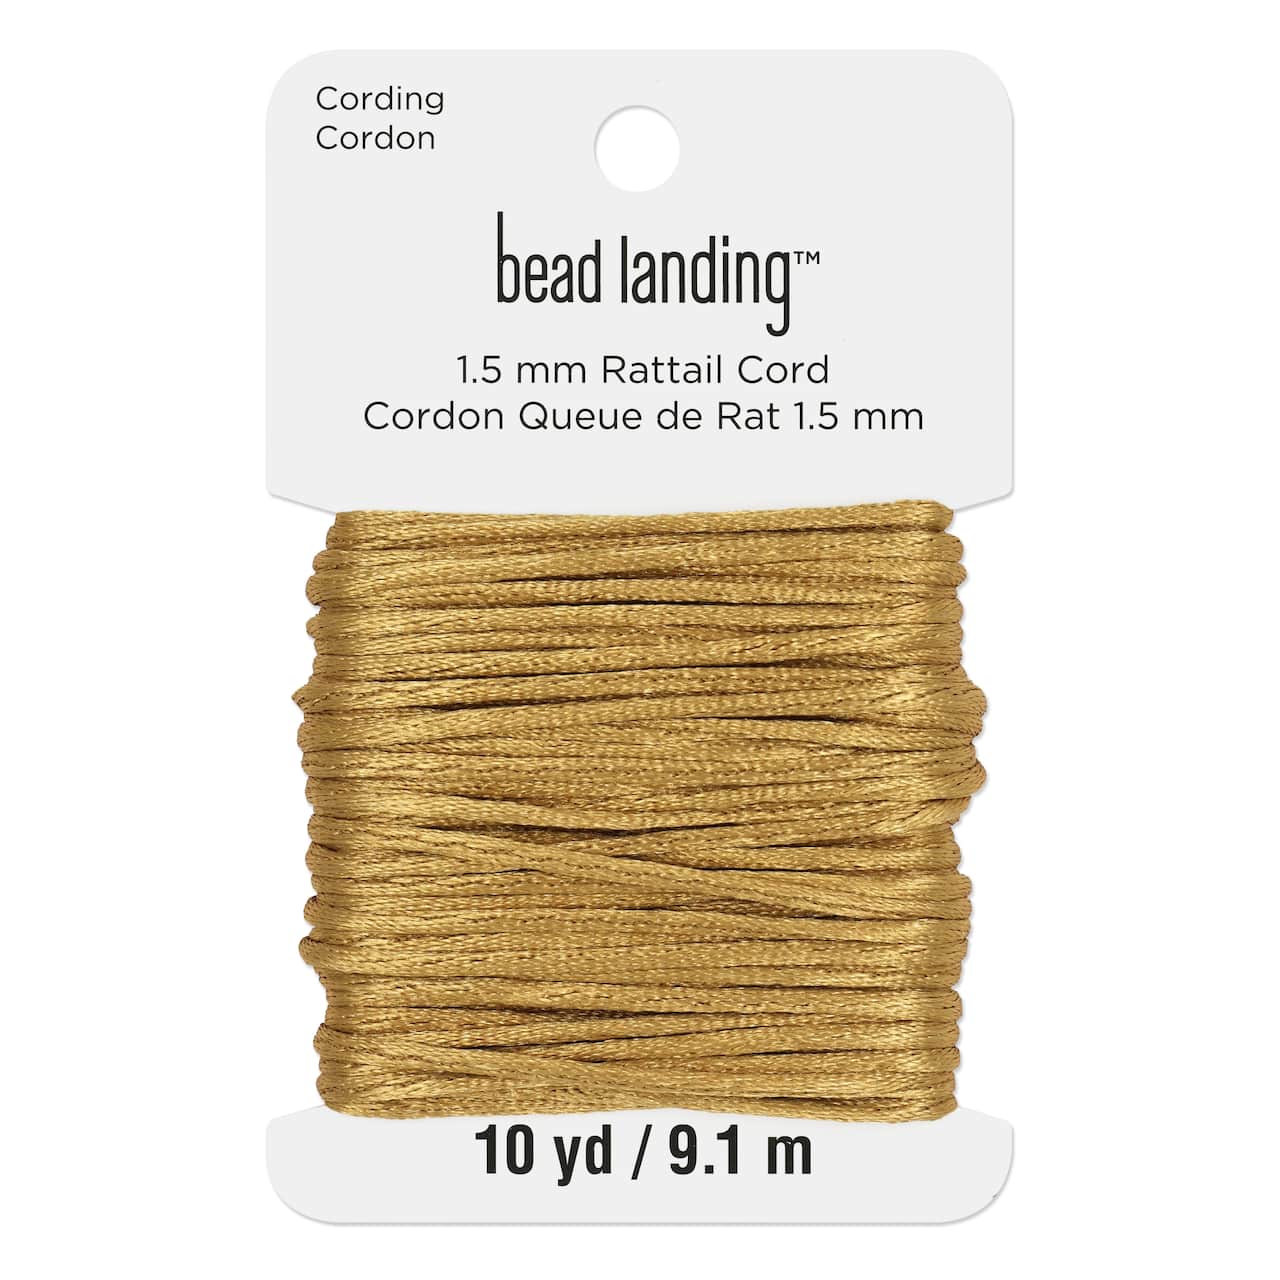 1.5mm Rattail Cord by Bead Landing&#x2122;